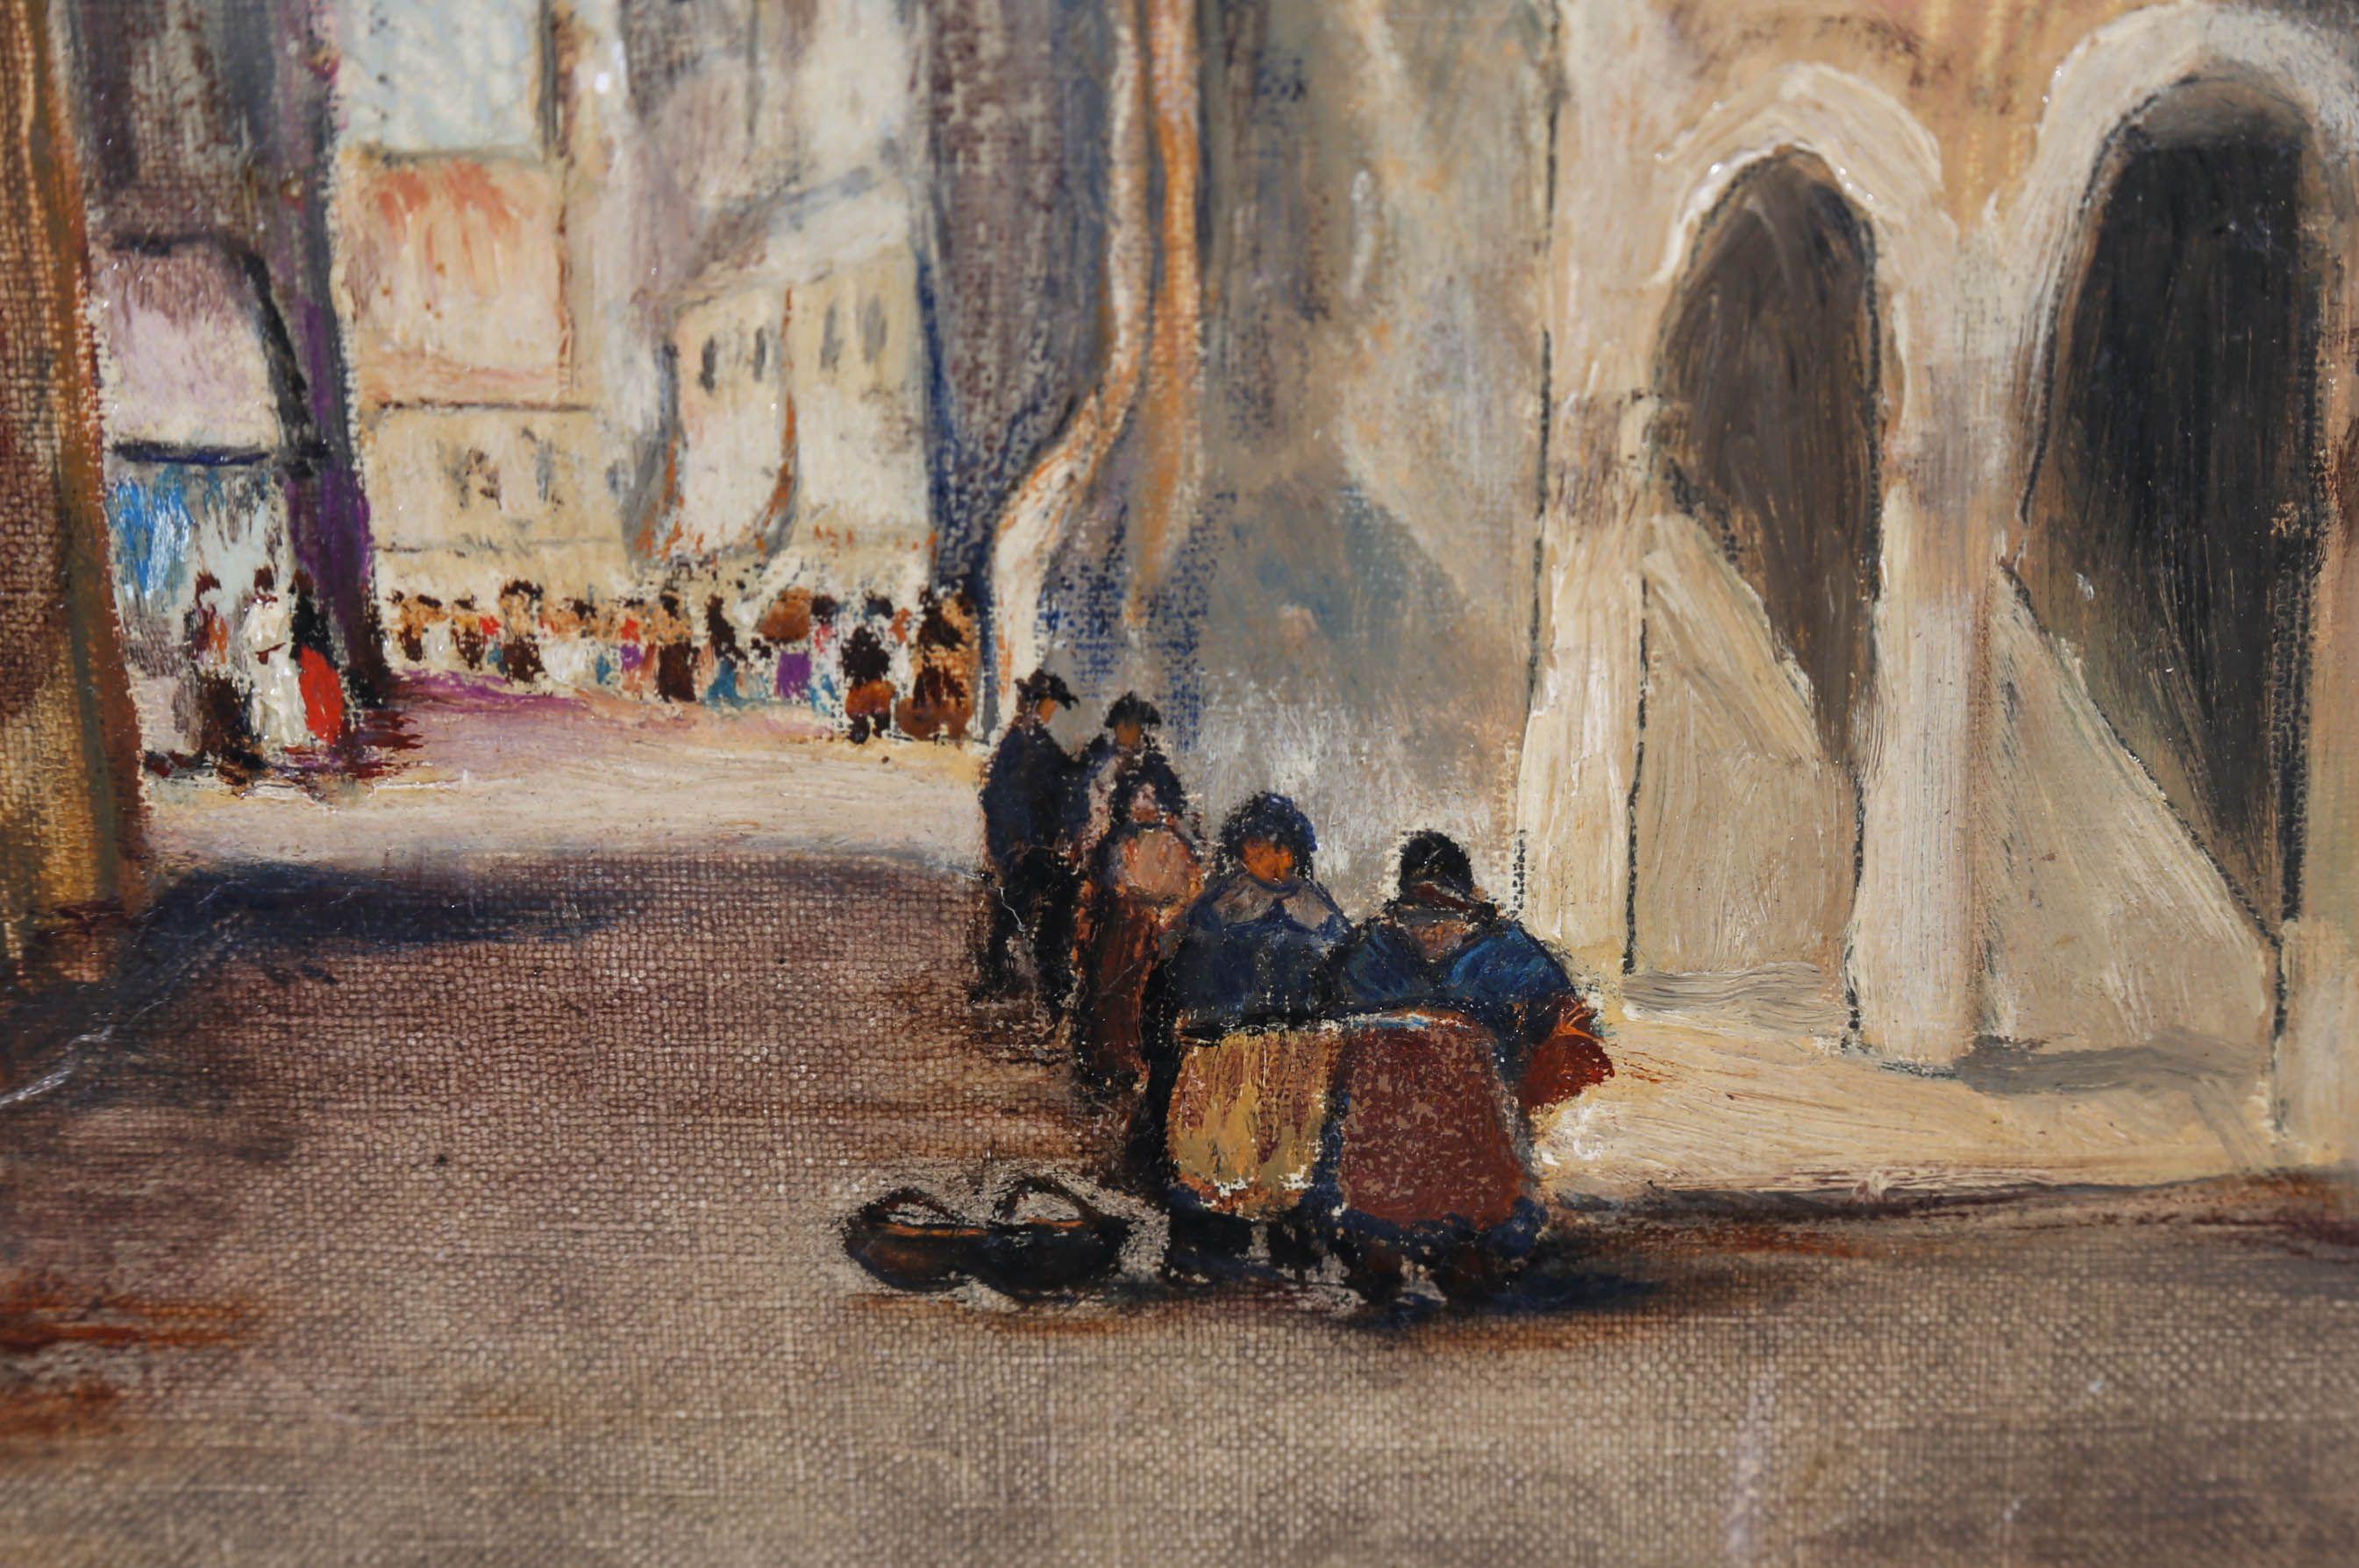 This charming continental scene depicts figures on a quiet Italian side street in the midst of running errands, and making polite conversation with acquittances. Further down on the street along, crowds can be seen gathering for the daily market in